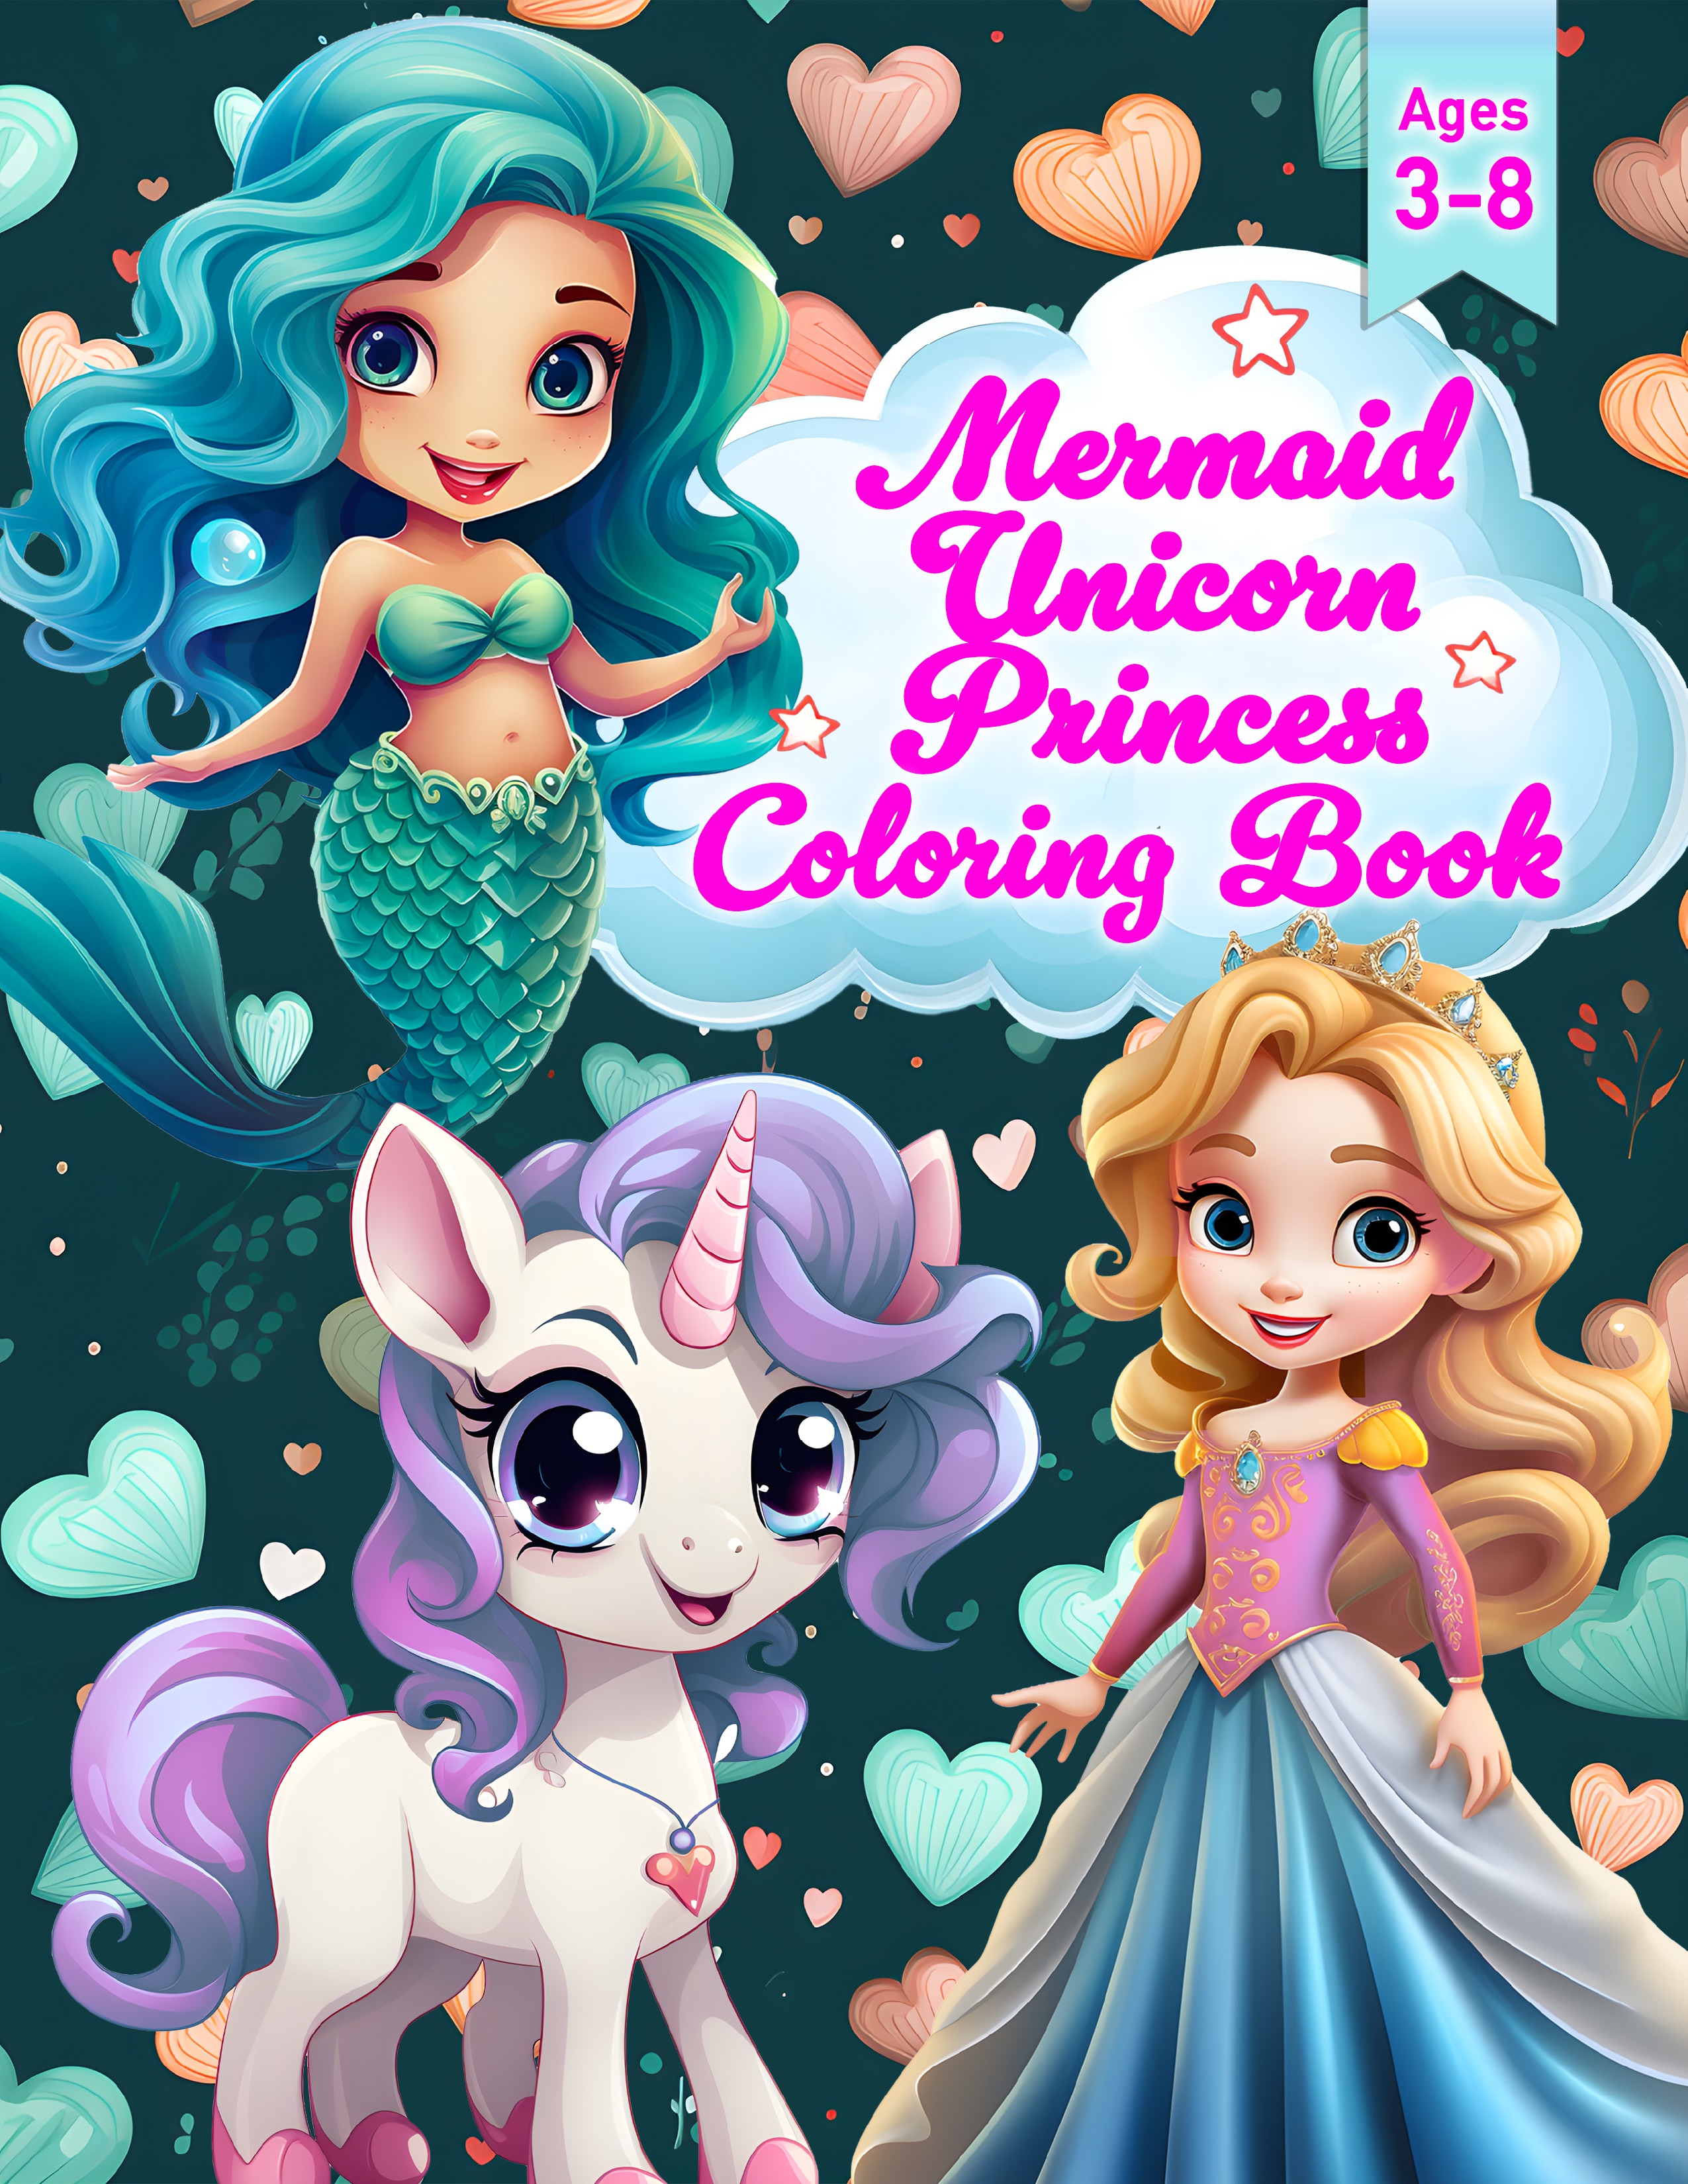 Mermaid Unicorn Princess Coloring Book Ages 3-8: Dive into a Magical World of Coloring Fun! Cute Creativity for Preschool, Kindergarten, and Girls Fine Motor Skills